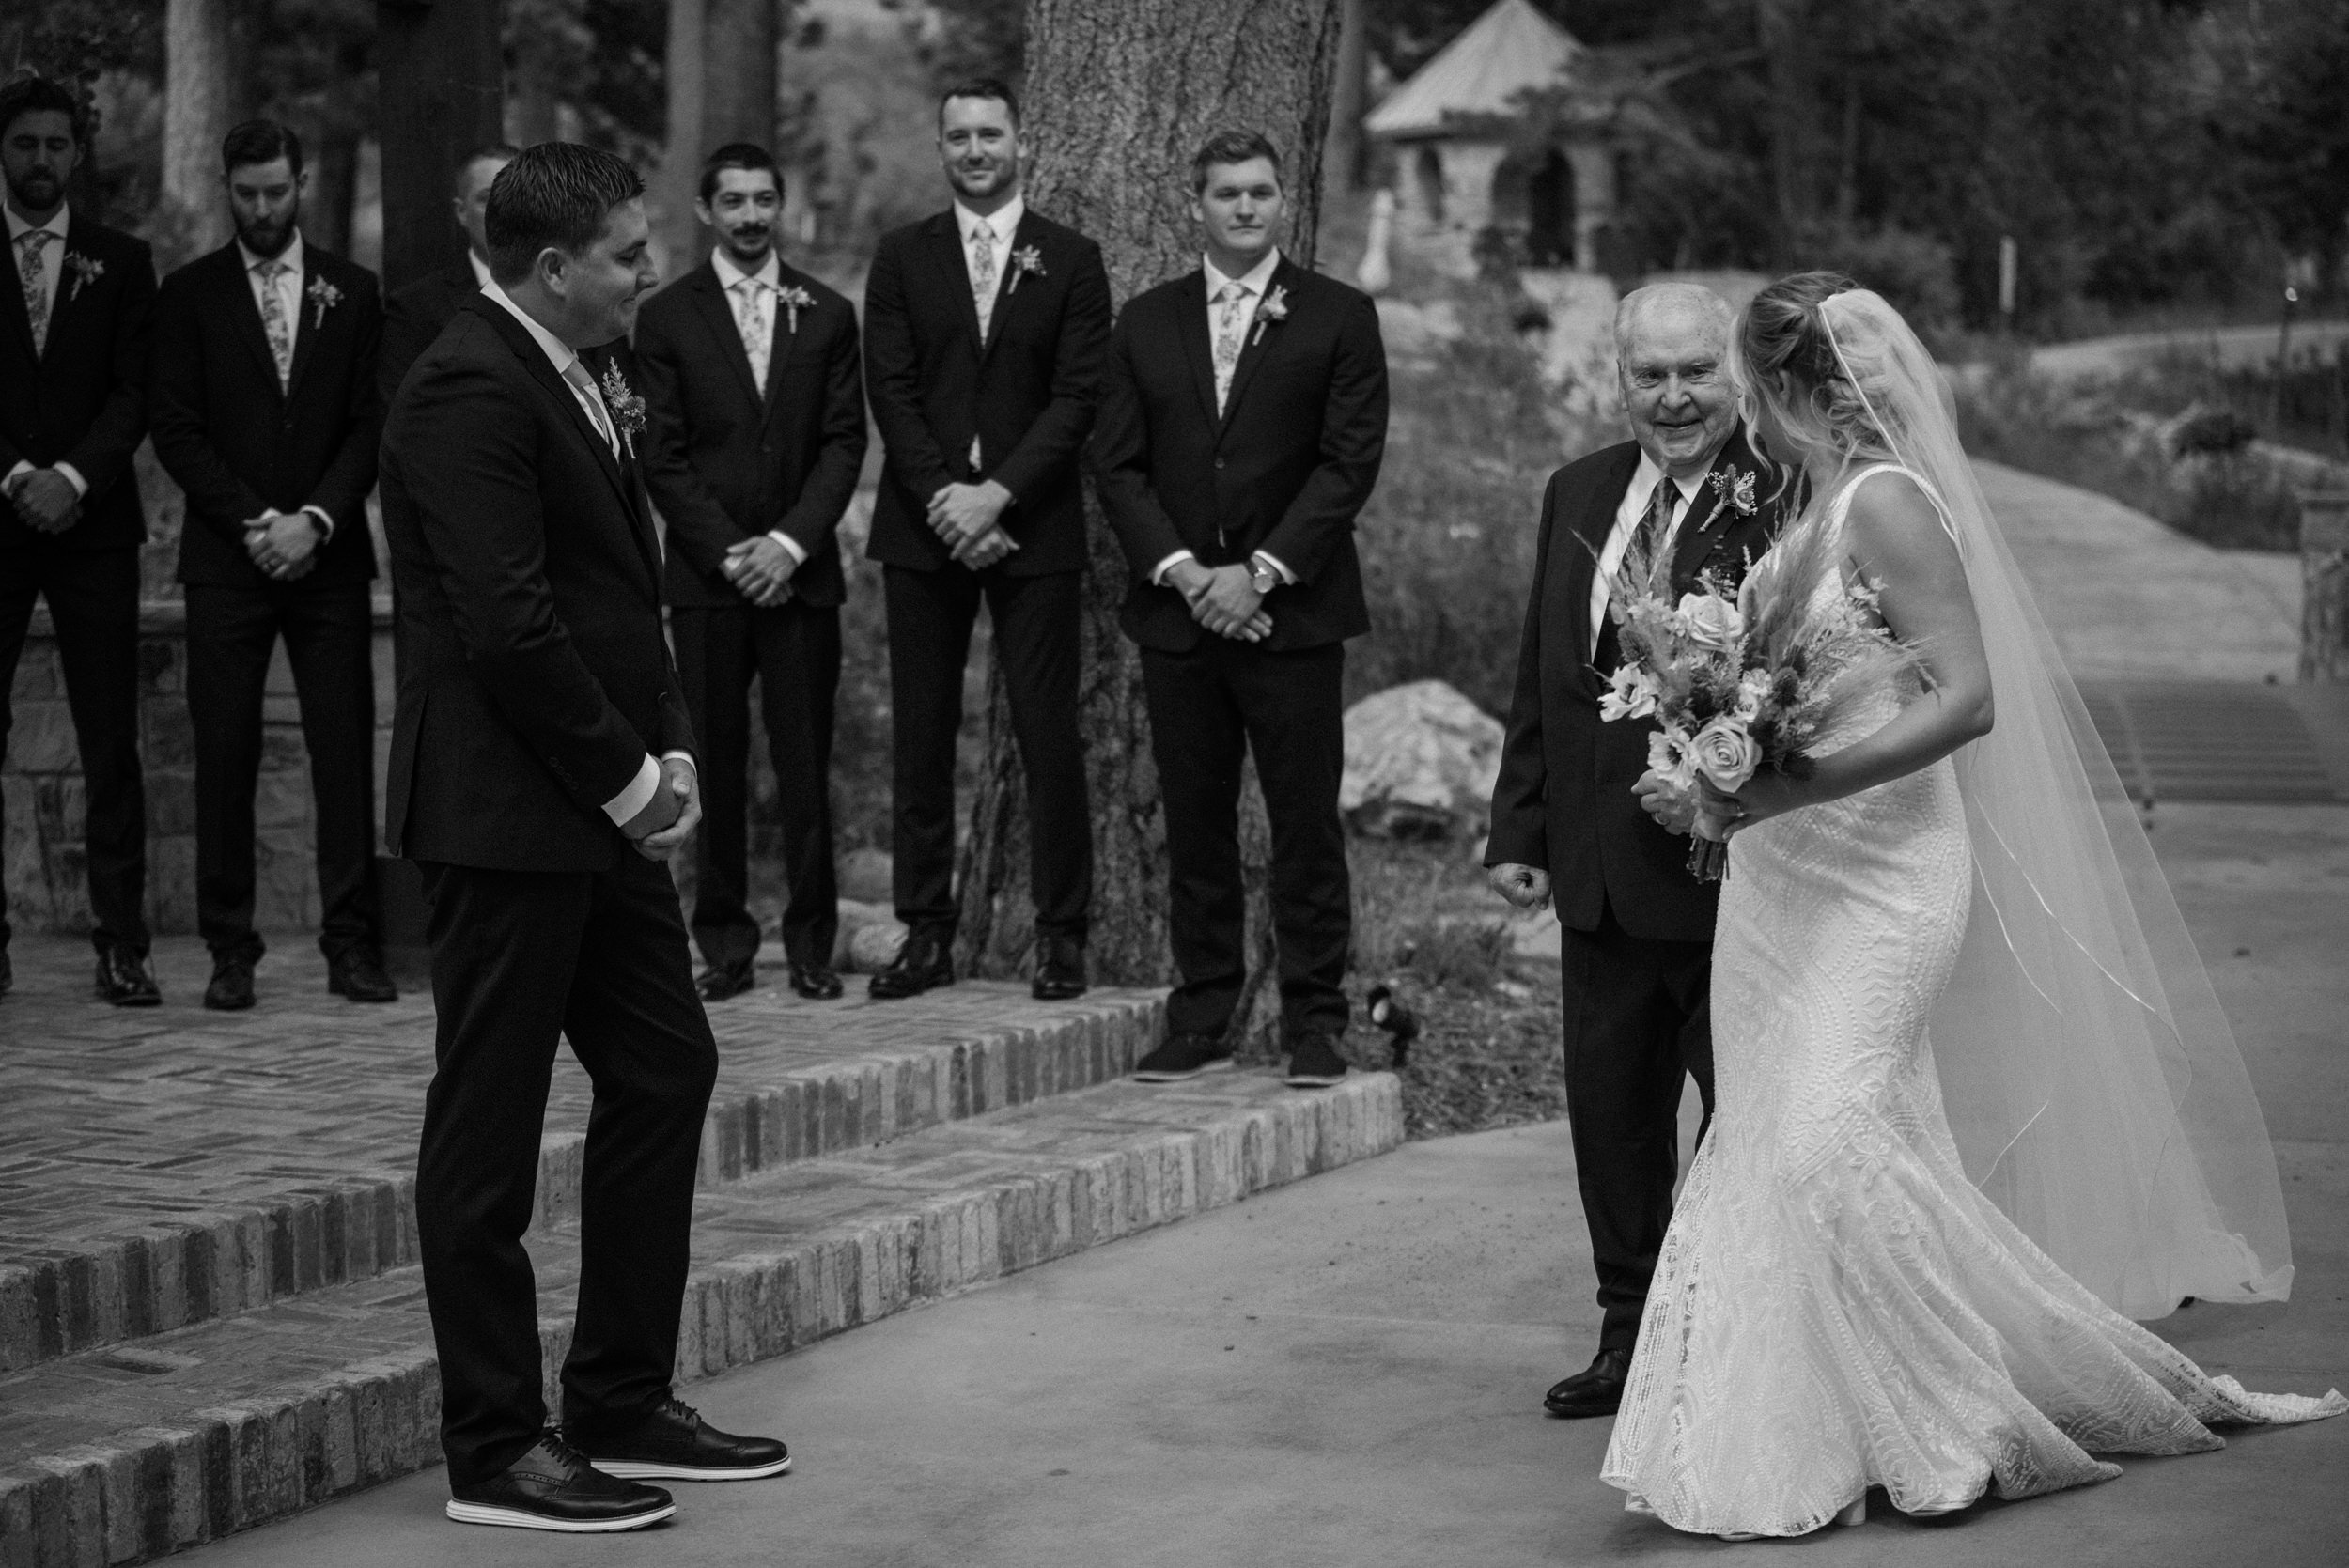 The father of the bride gives her away at the altar